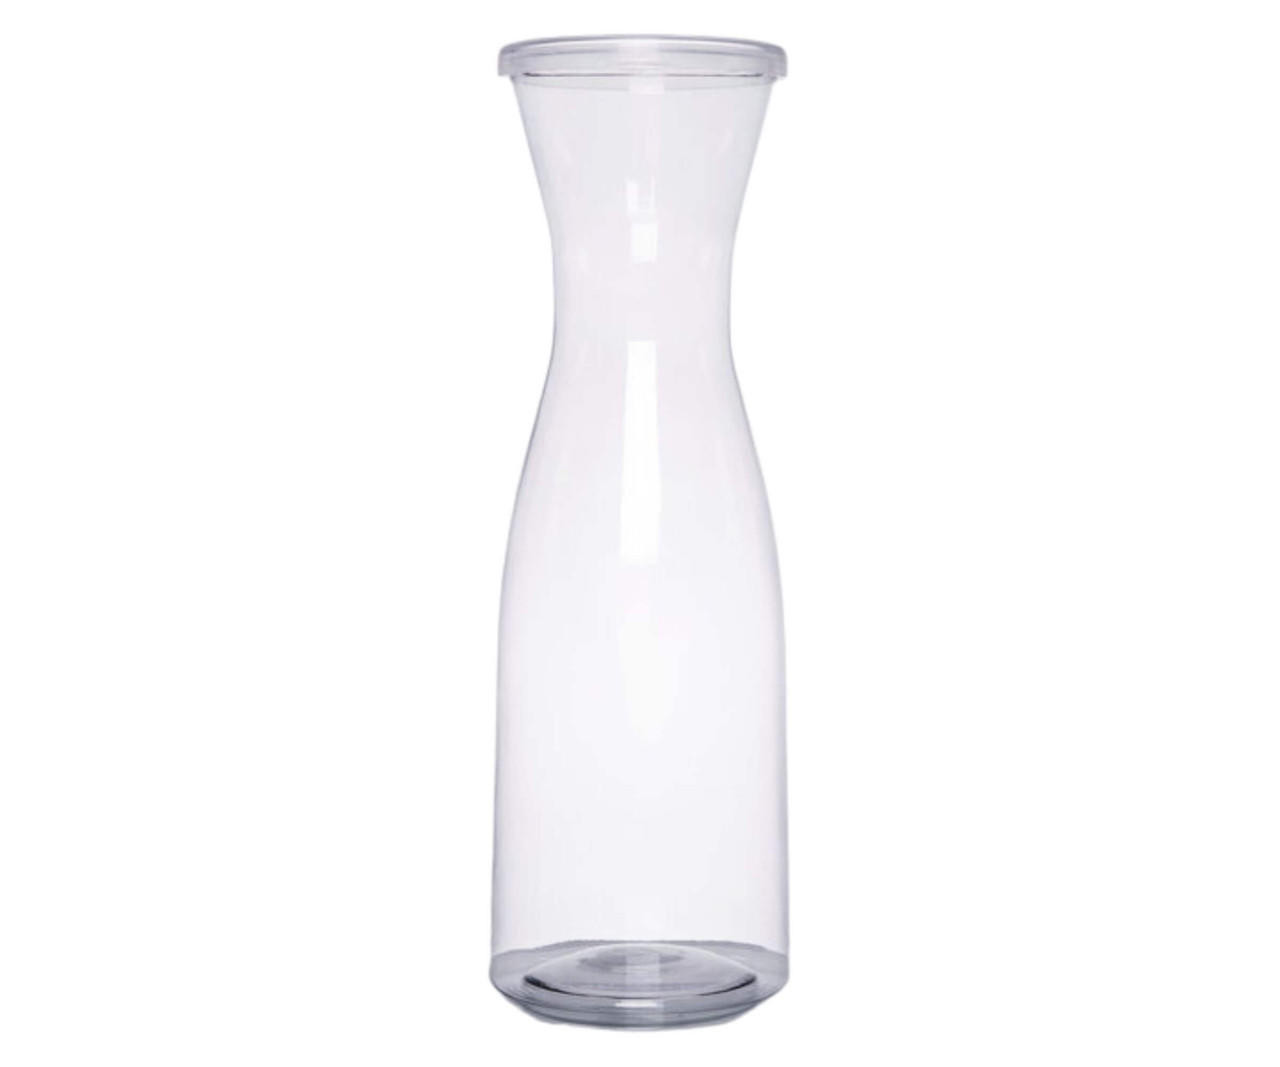 https://cdn11.bigcommerce.com/s-g5ygv2at8j/images/stencil/1280x1280/products/15445/37109/fineline-platter-pleasers-disposable-35-oz-clear-plastic-carafe-with-lid__14656.1692326339.jpg?c=1